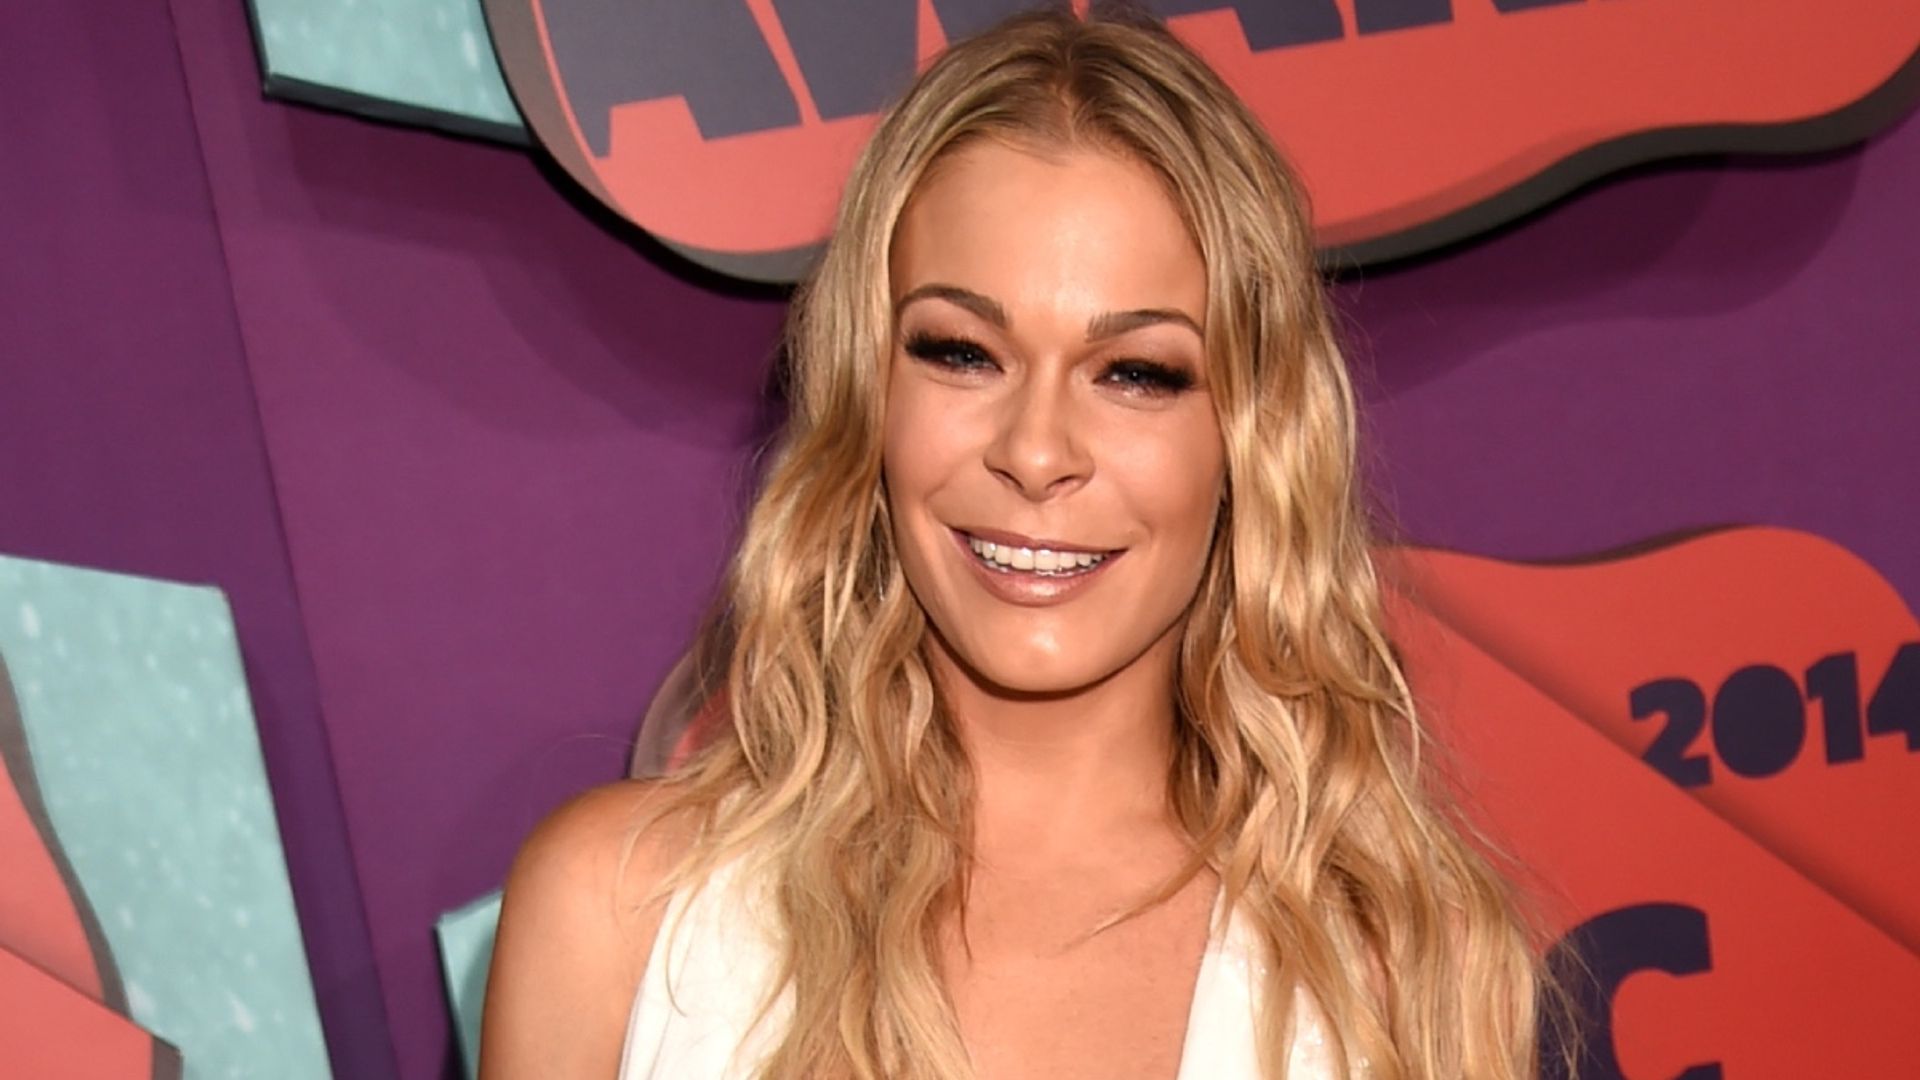 Leann Rimes Displays Very Toned Abs In Revealing Crop Tops In Show Of